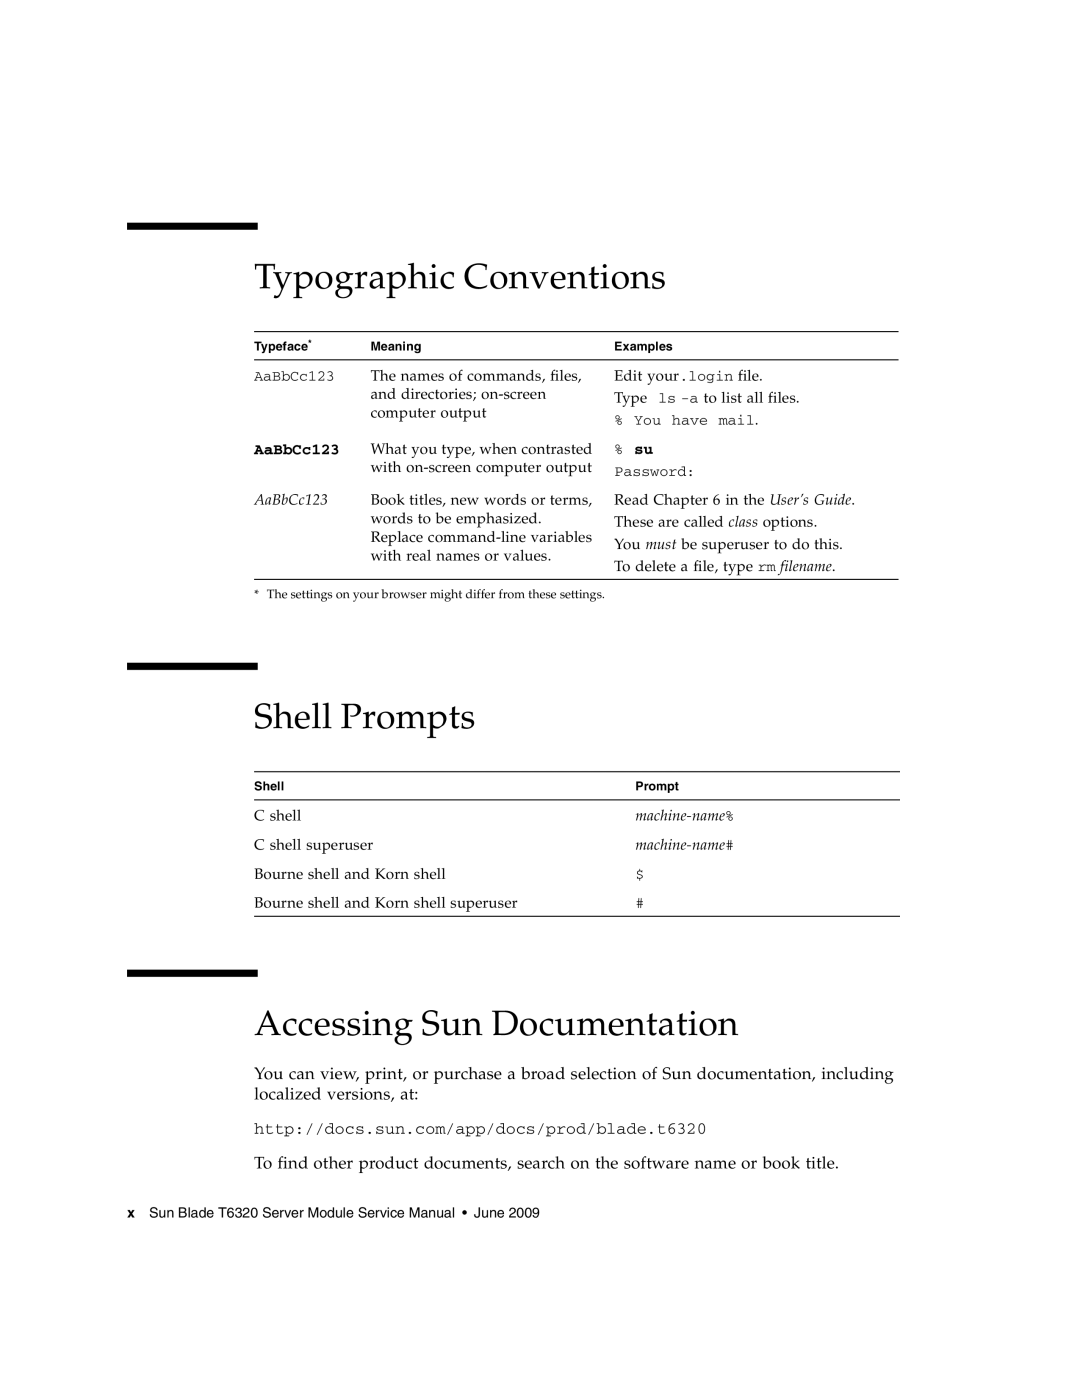 Sun Microsystems T6320 service manual Typographic Conventions, Shell Prompts, Accessing Sun Documentation 